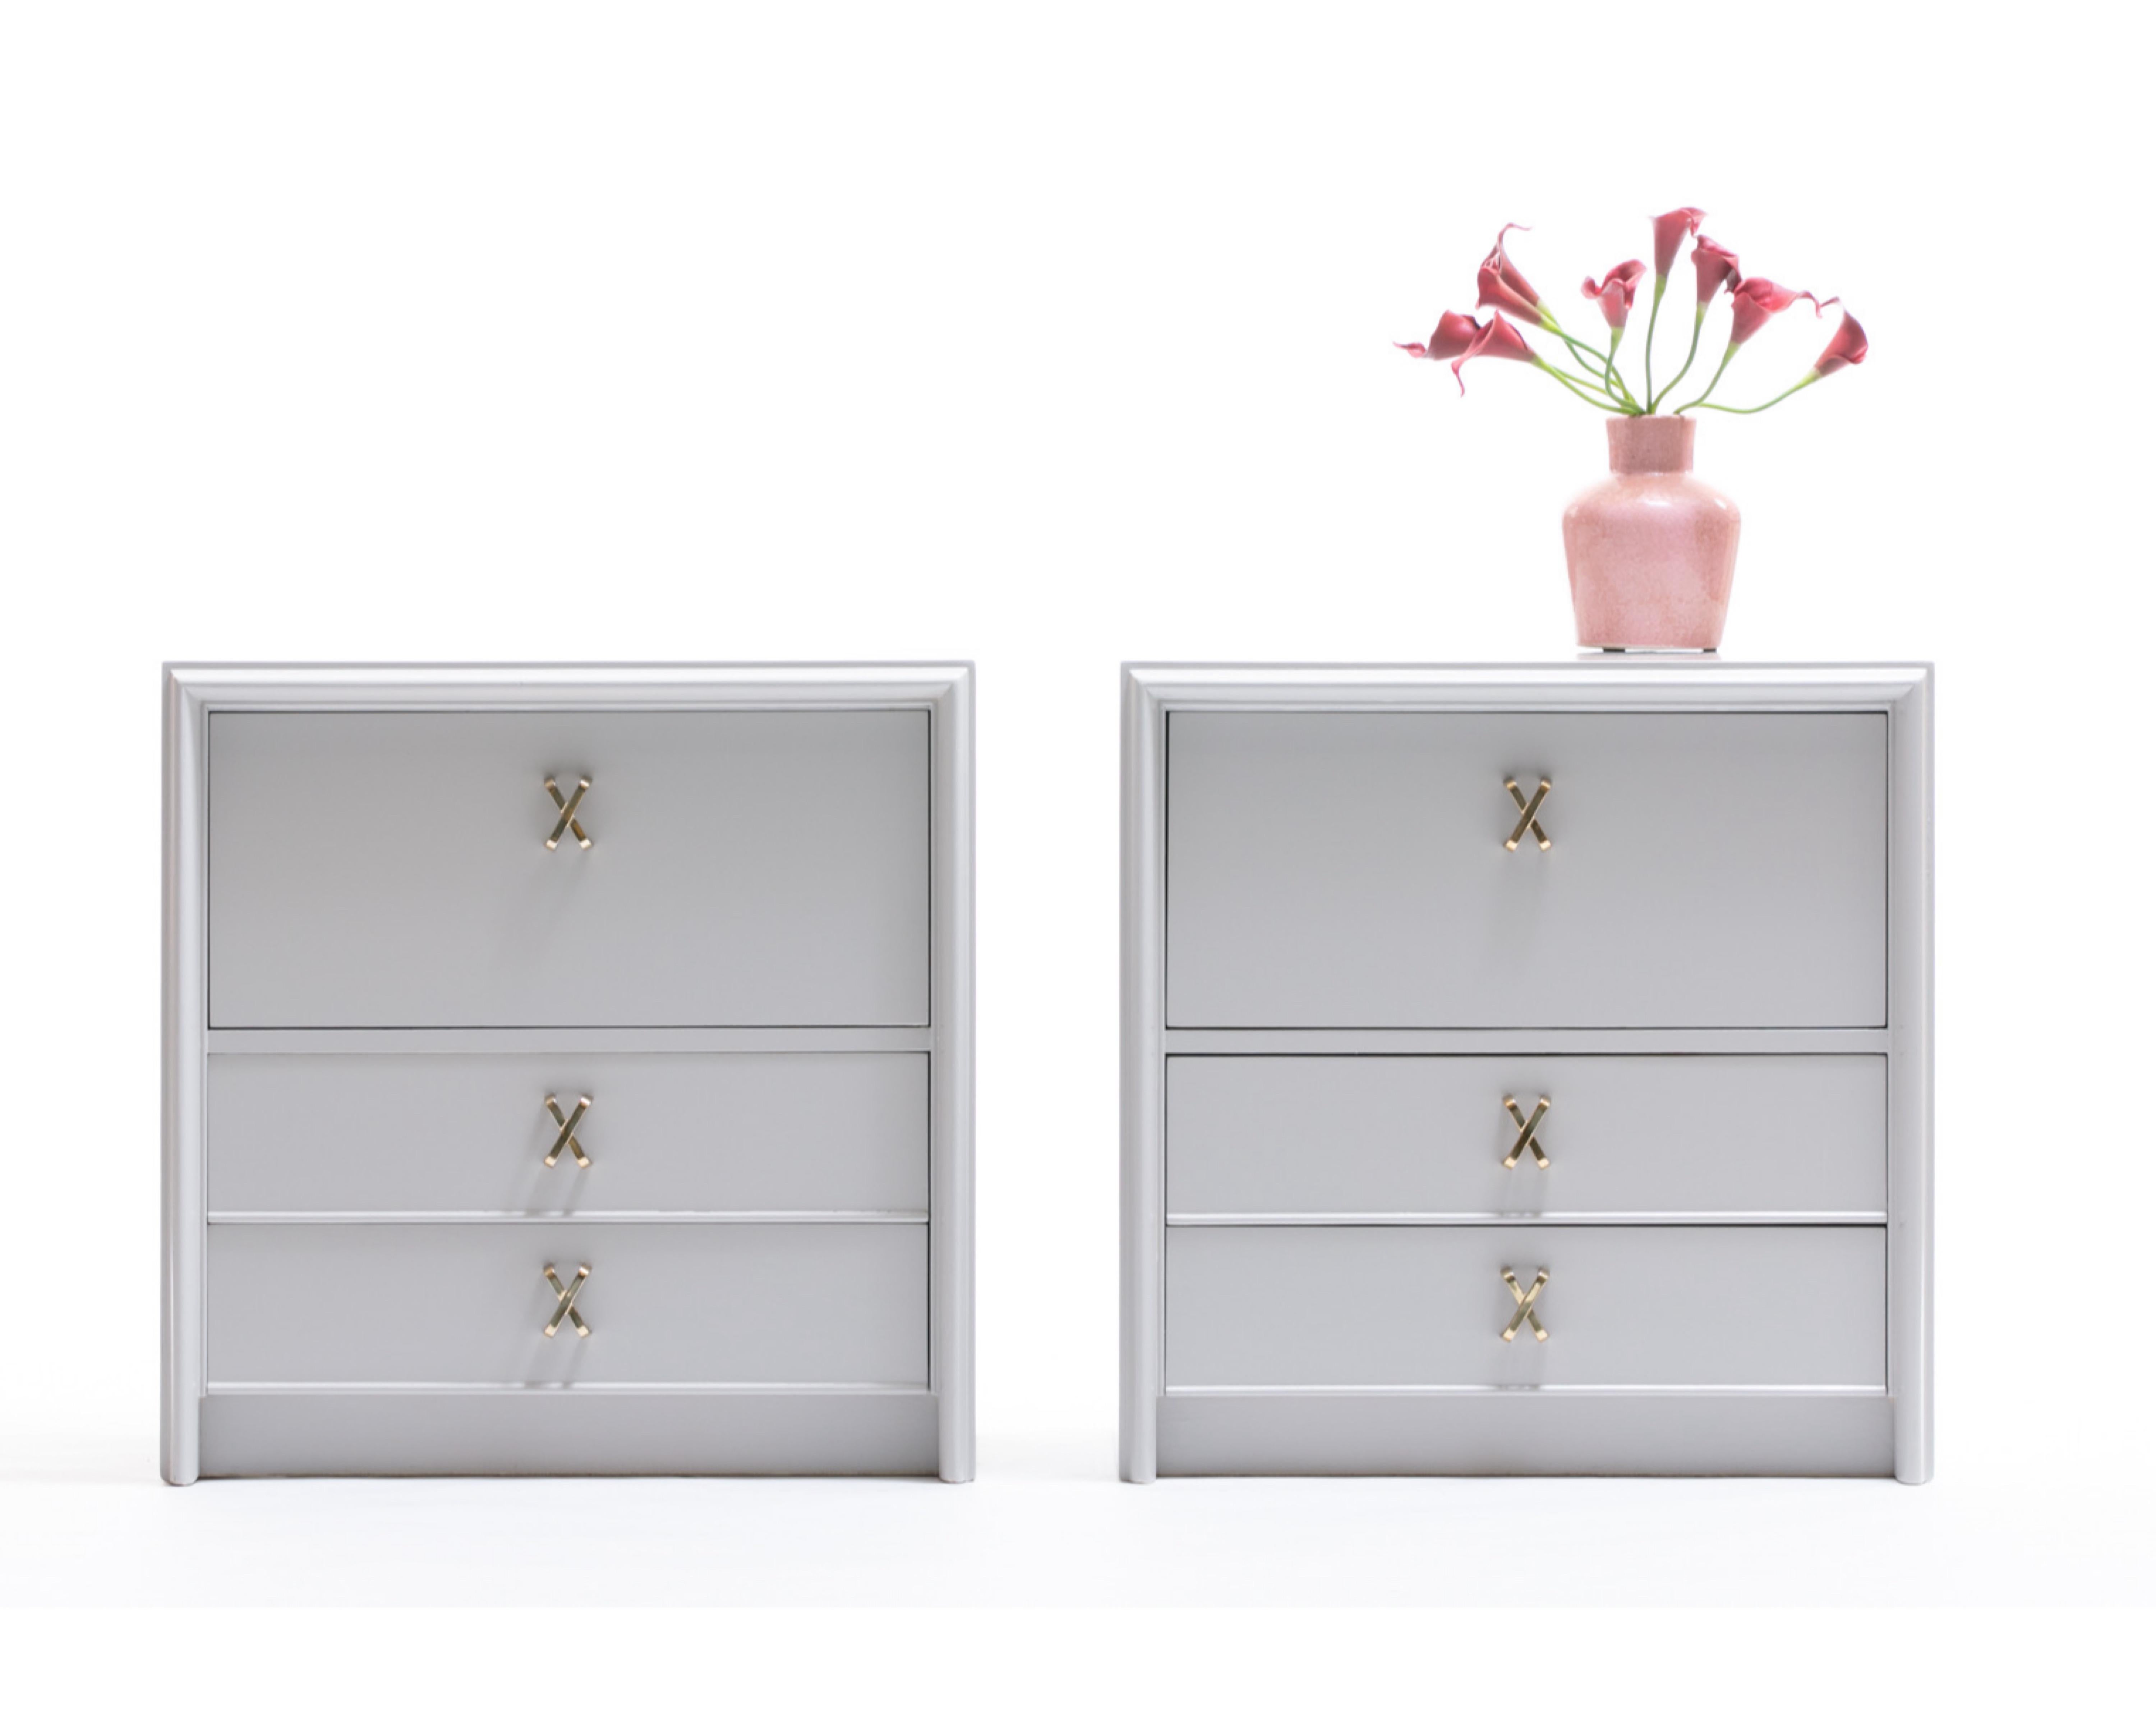 Everyone loves Paul Frankl furniture. A pillar of design, he created some of the most iconic mid century pieces of furniture. And here we have a lovely pair of Paul Frankl Farrow and Ball Pavilion Grey lacquered nightstands from Frankl's Debonair